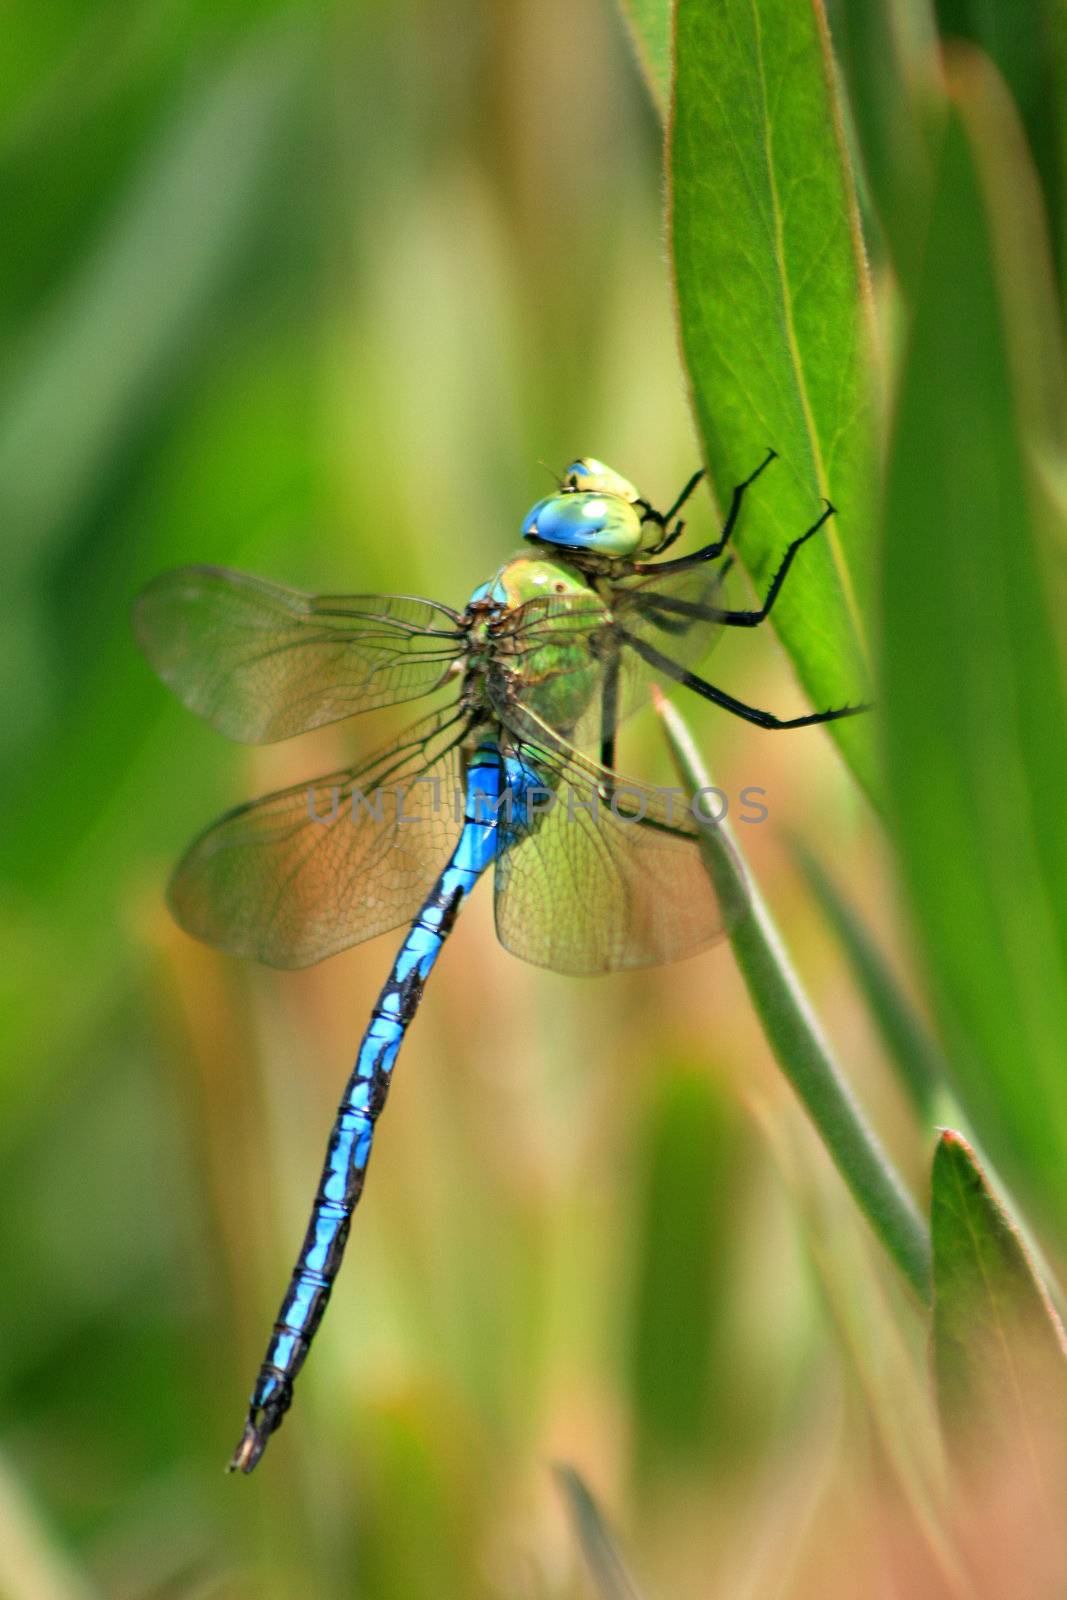 Anax imperator dragonfly in a stick